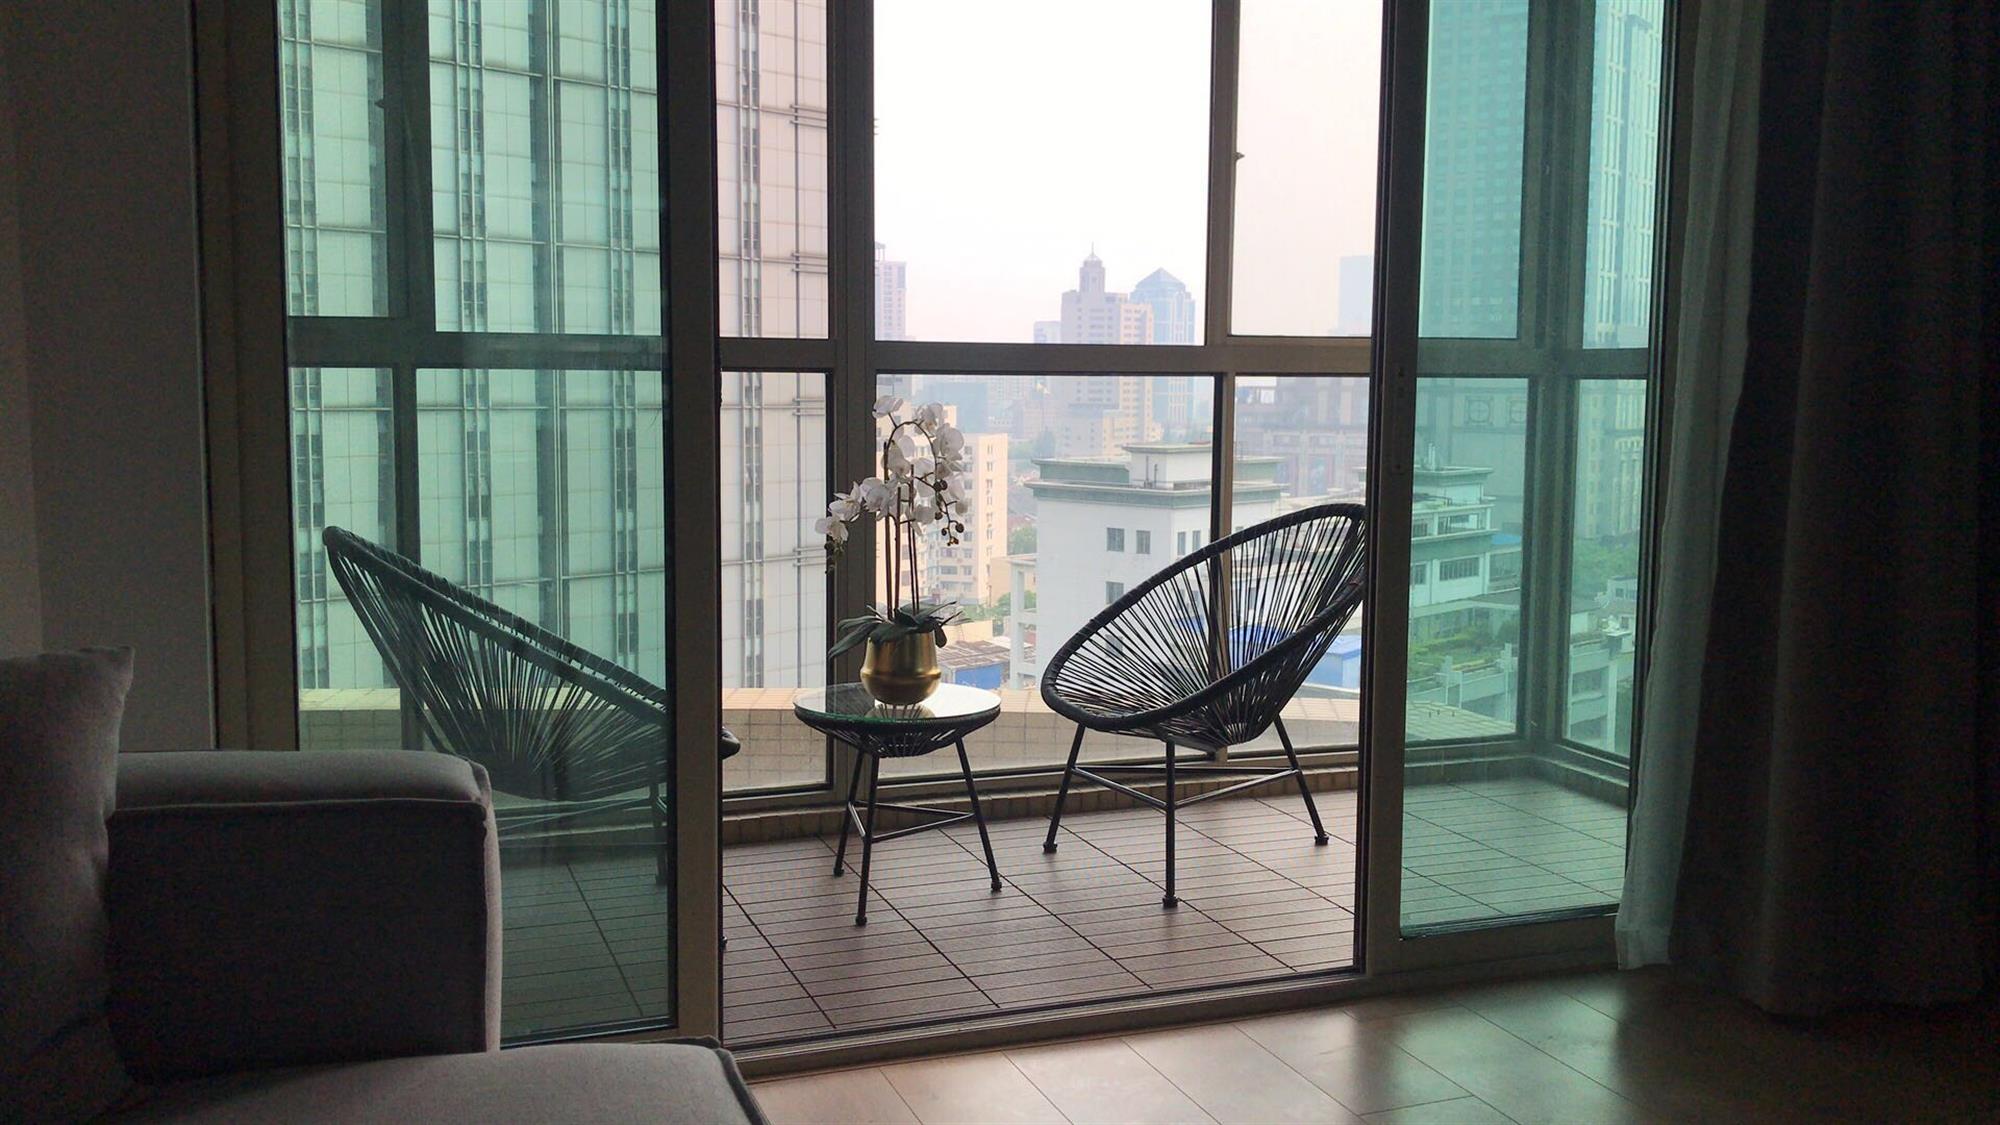 Big Balcony Renovated Modern La Doll Apartment for Rent in Jing’an Shanghai